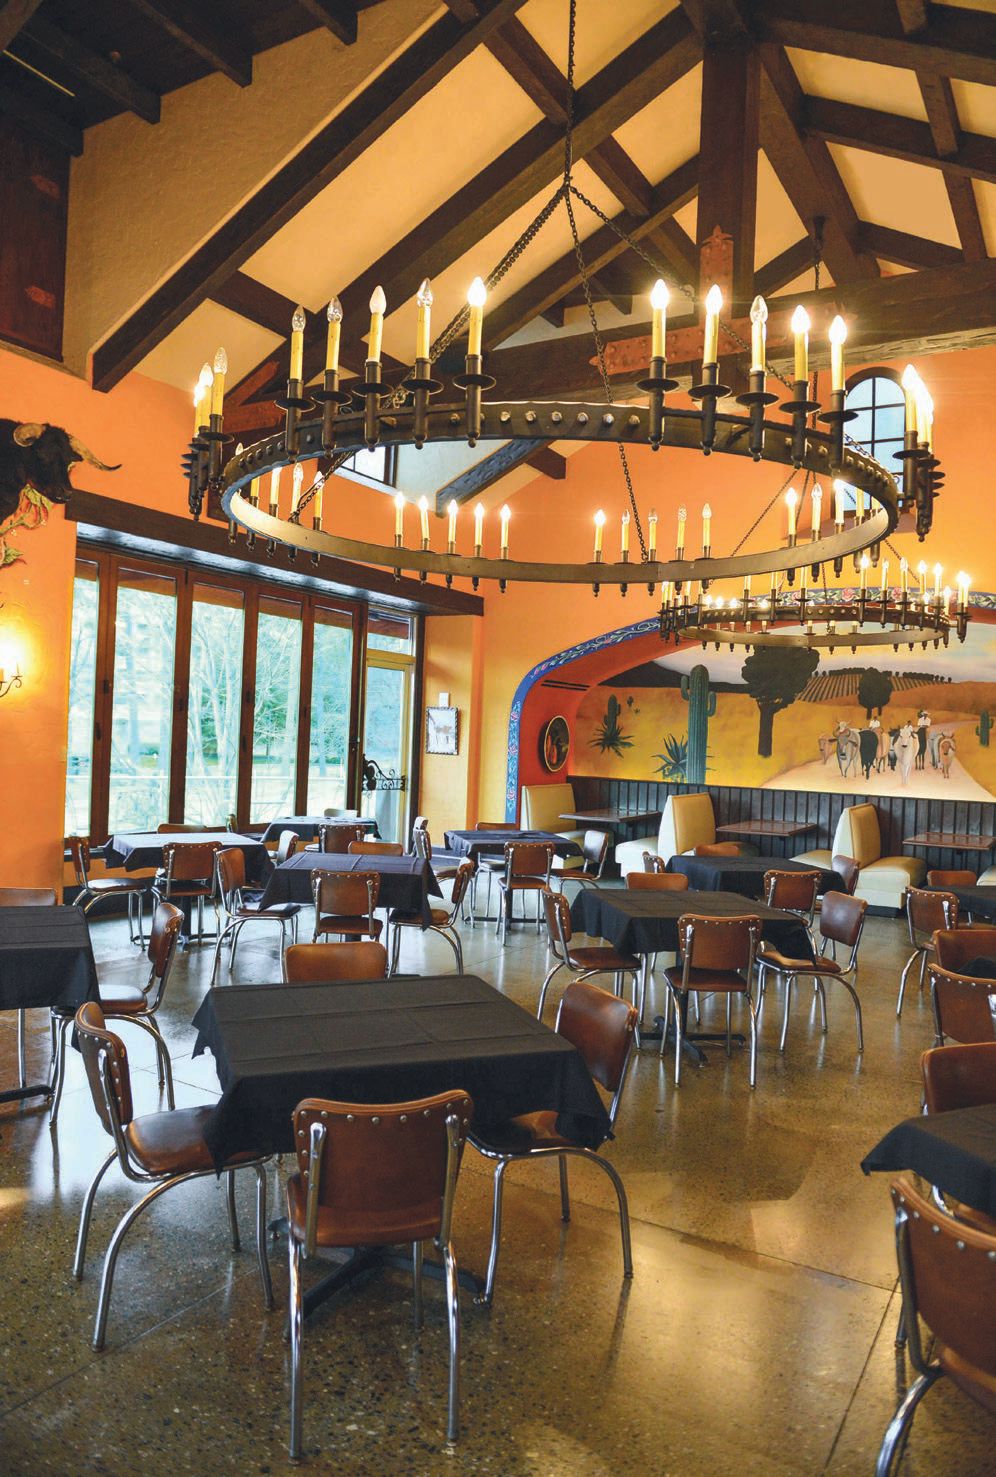 El Azteca Perimeter’s interiors are like stepping into Mexico PHOTO BY KIM EVANS